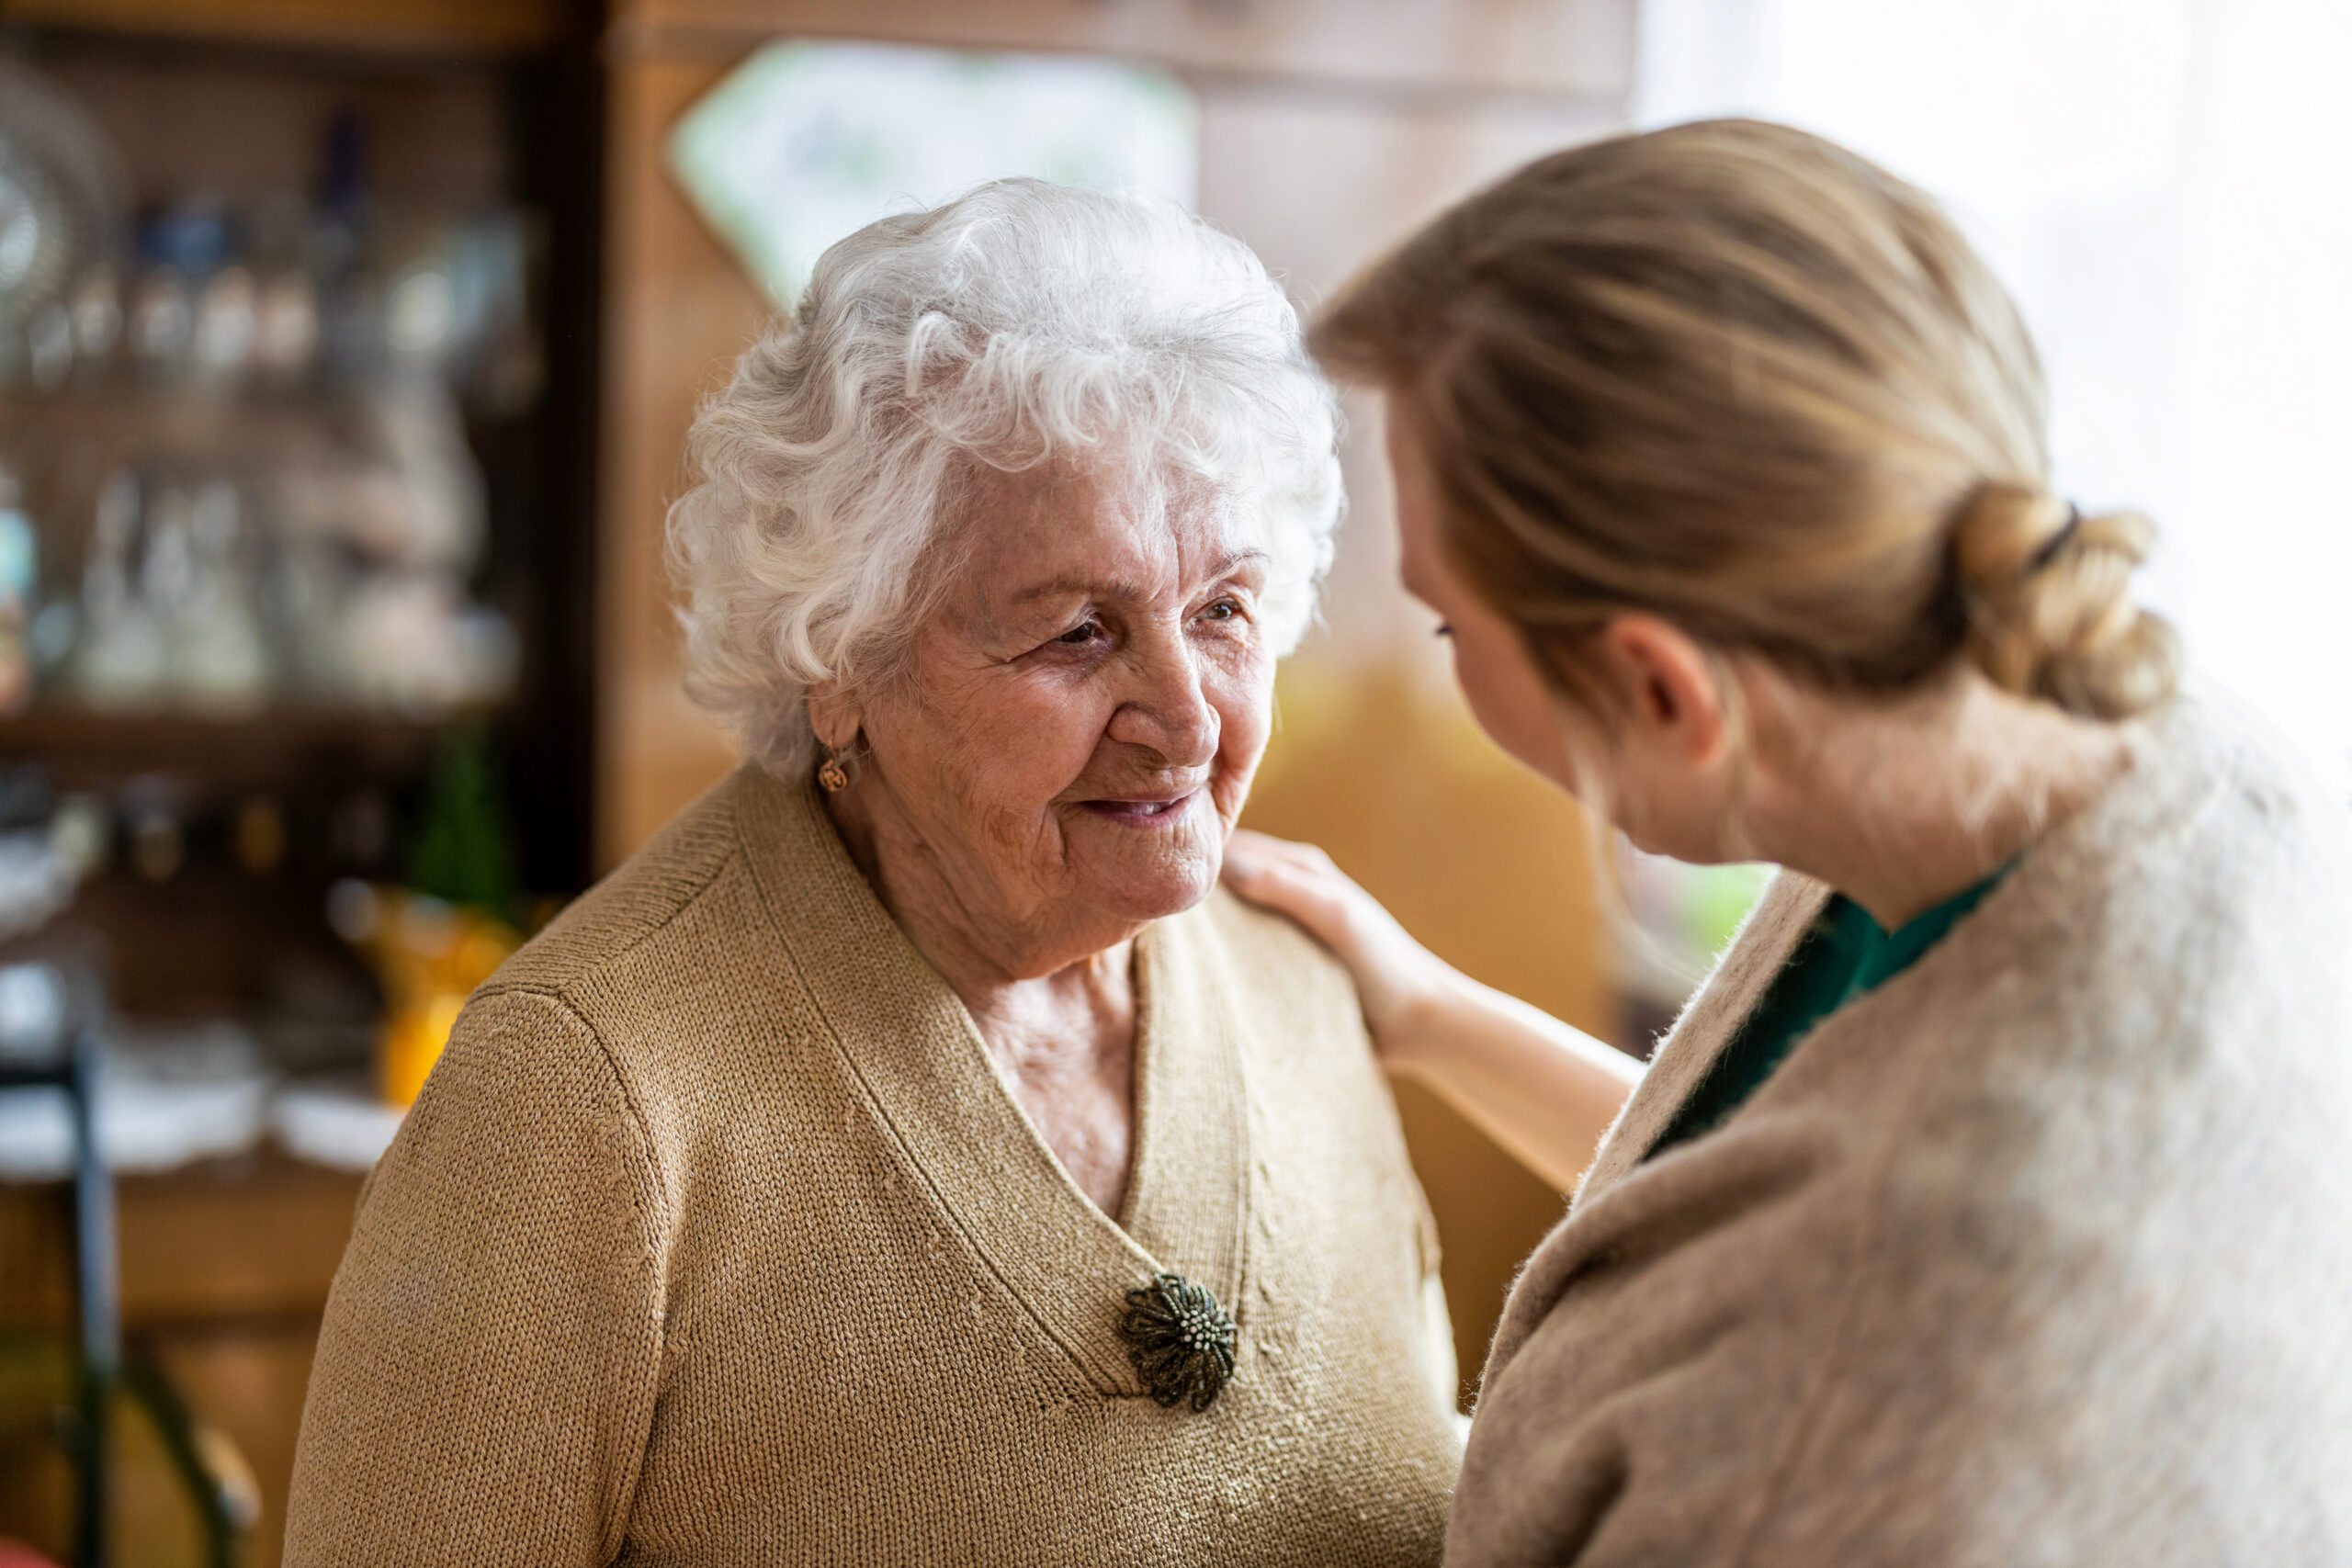 Home health aide providing compassionate home care to an elderly woman